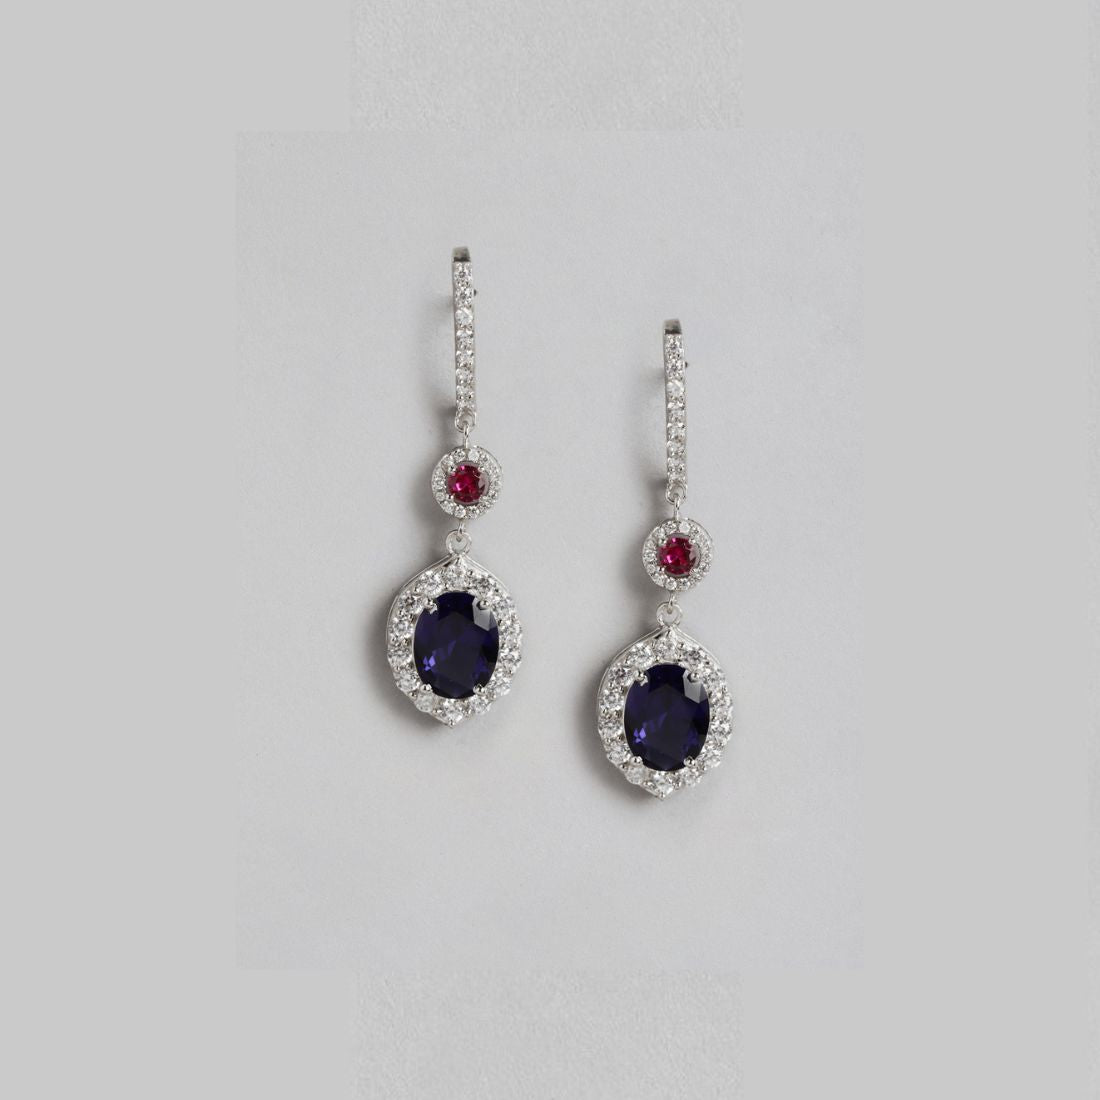 Enchanted Dazzle Rhodium-Plated 925 Sterling Silver Drop Earrings